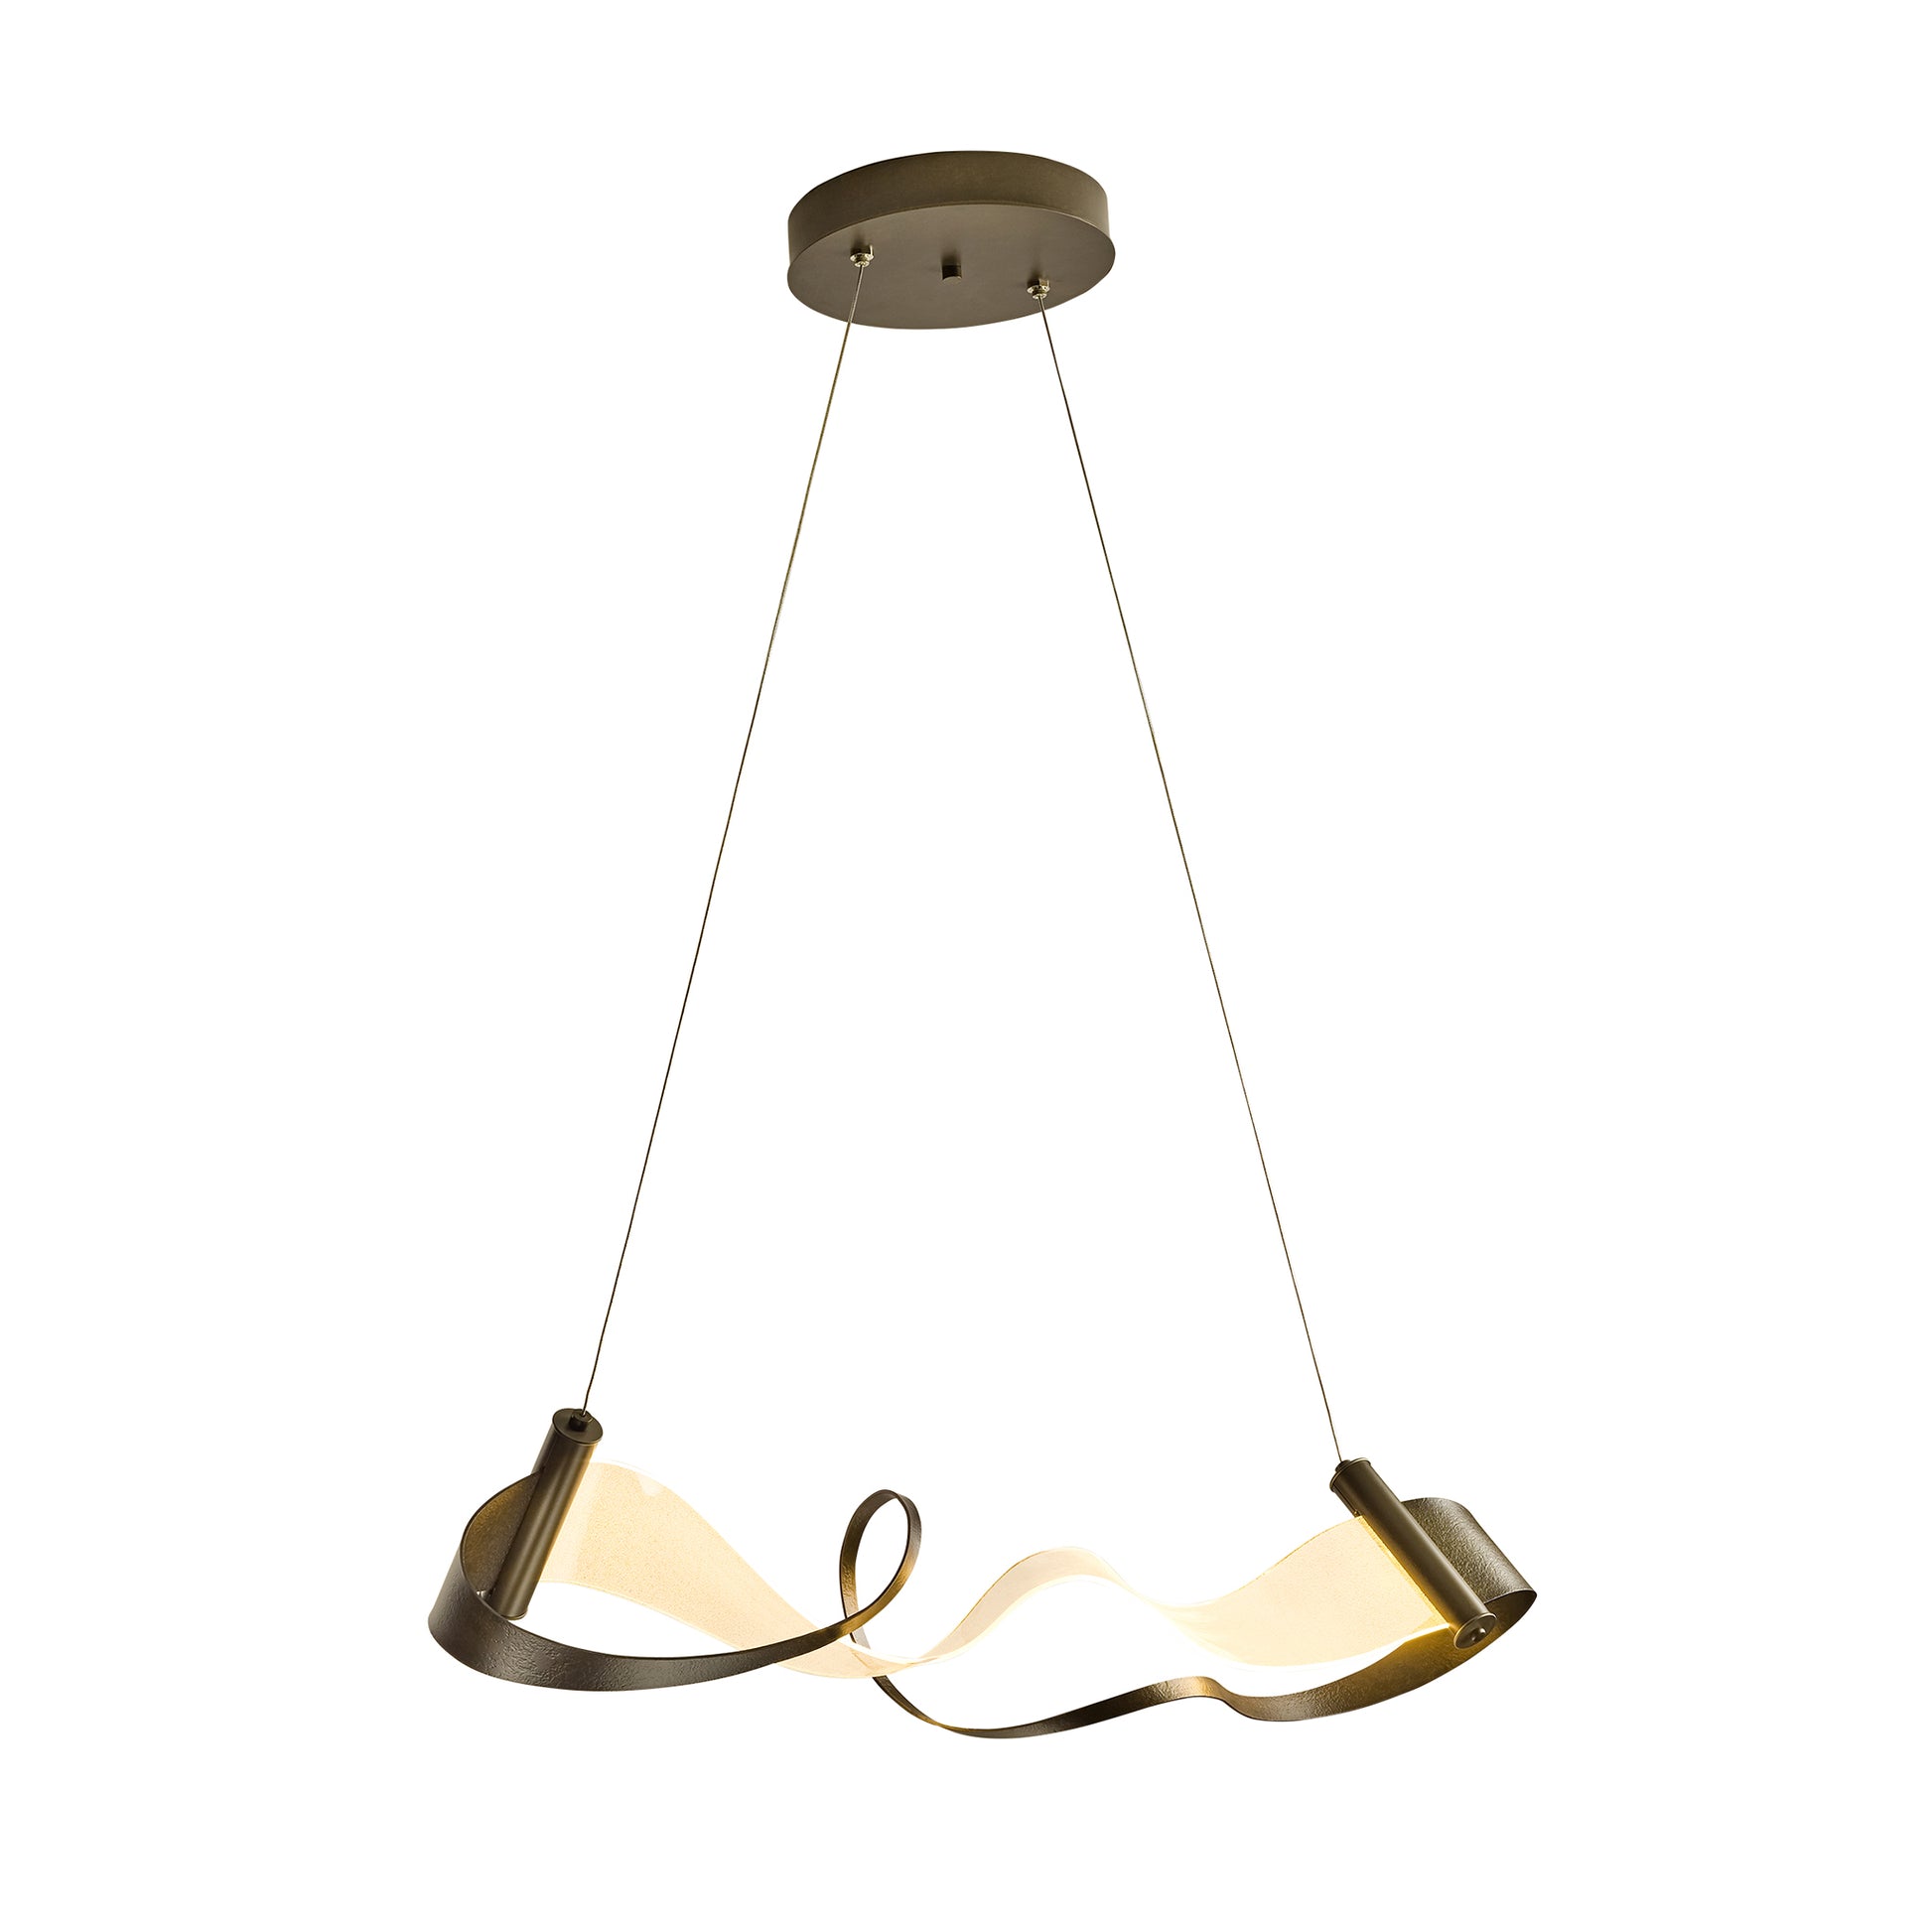 A handcrafted Hubbardton Forge Zephyr LED Pendant with a curved shape hanging from it.